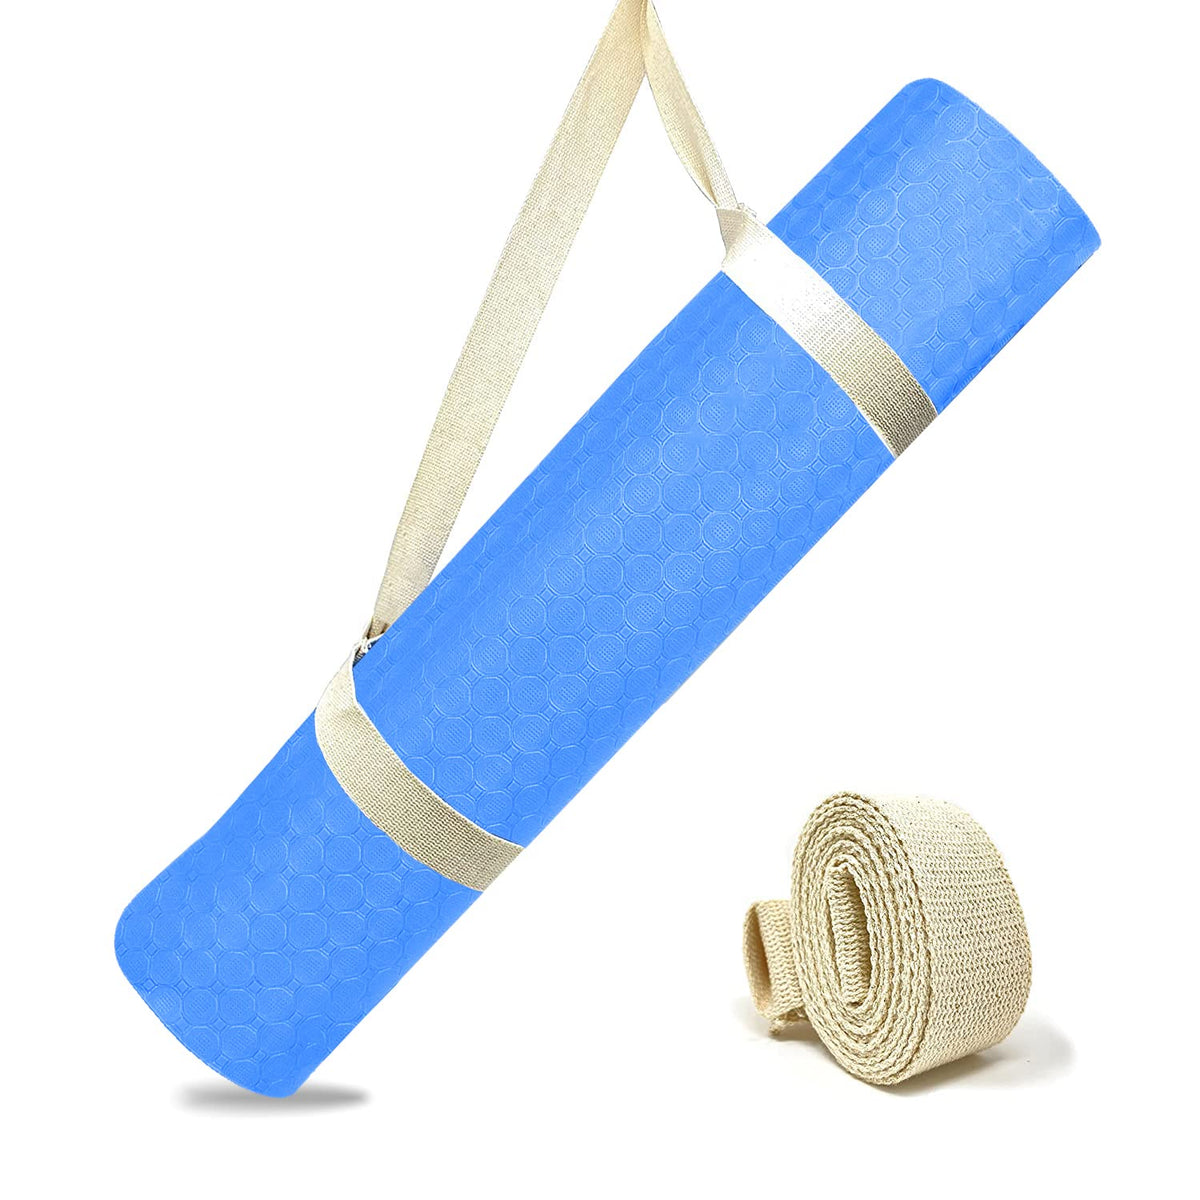 Strauss Anti Skid TPE Yoga Mat with Carry Strap, 8mm, (Sky Blue)